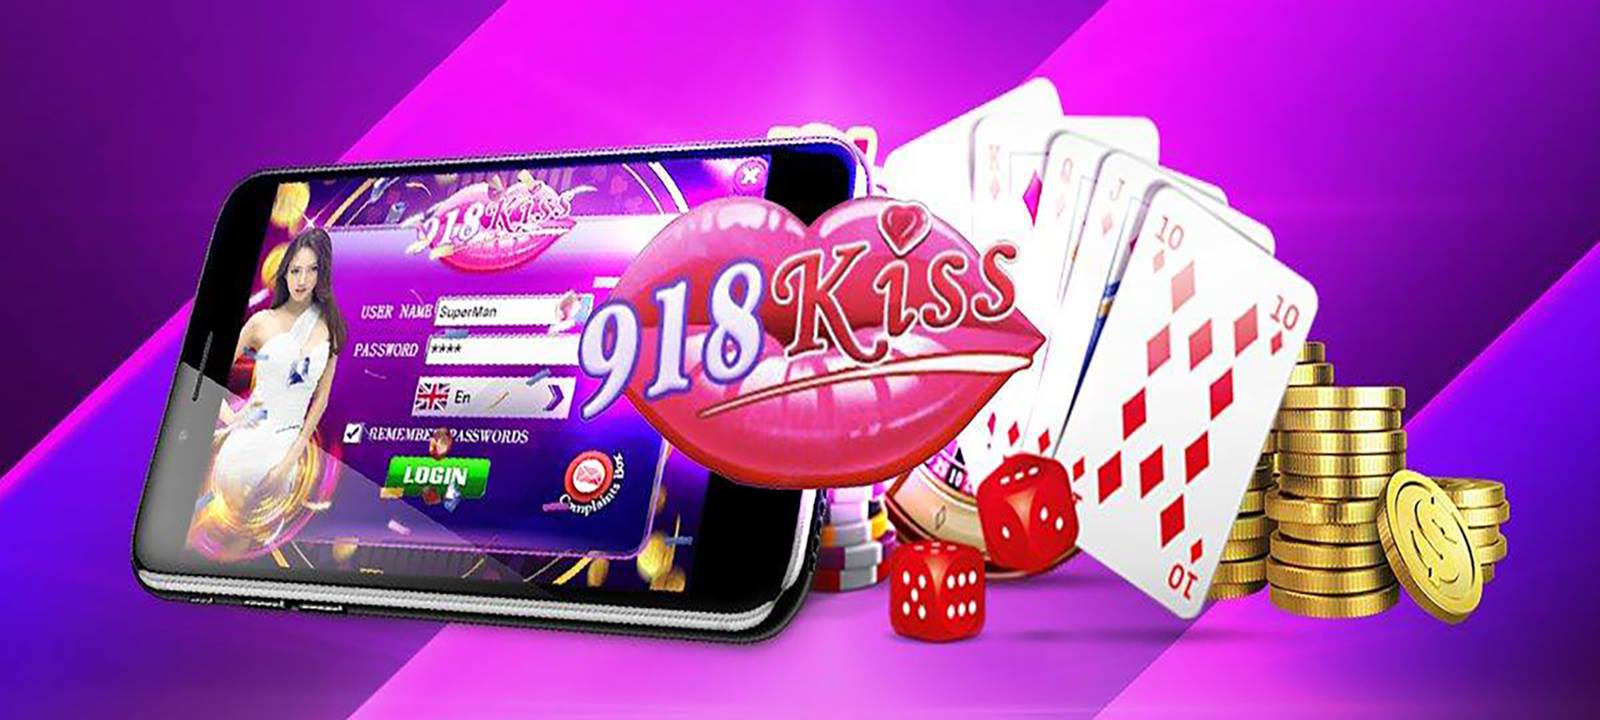 The world's largest online gambling game!